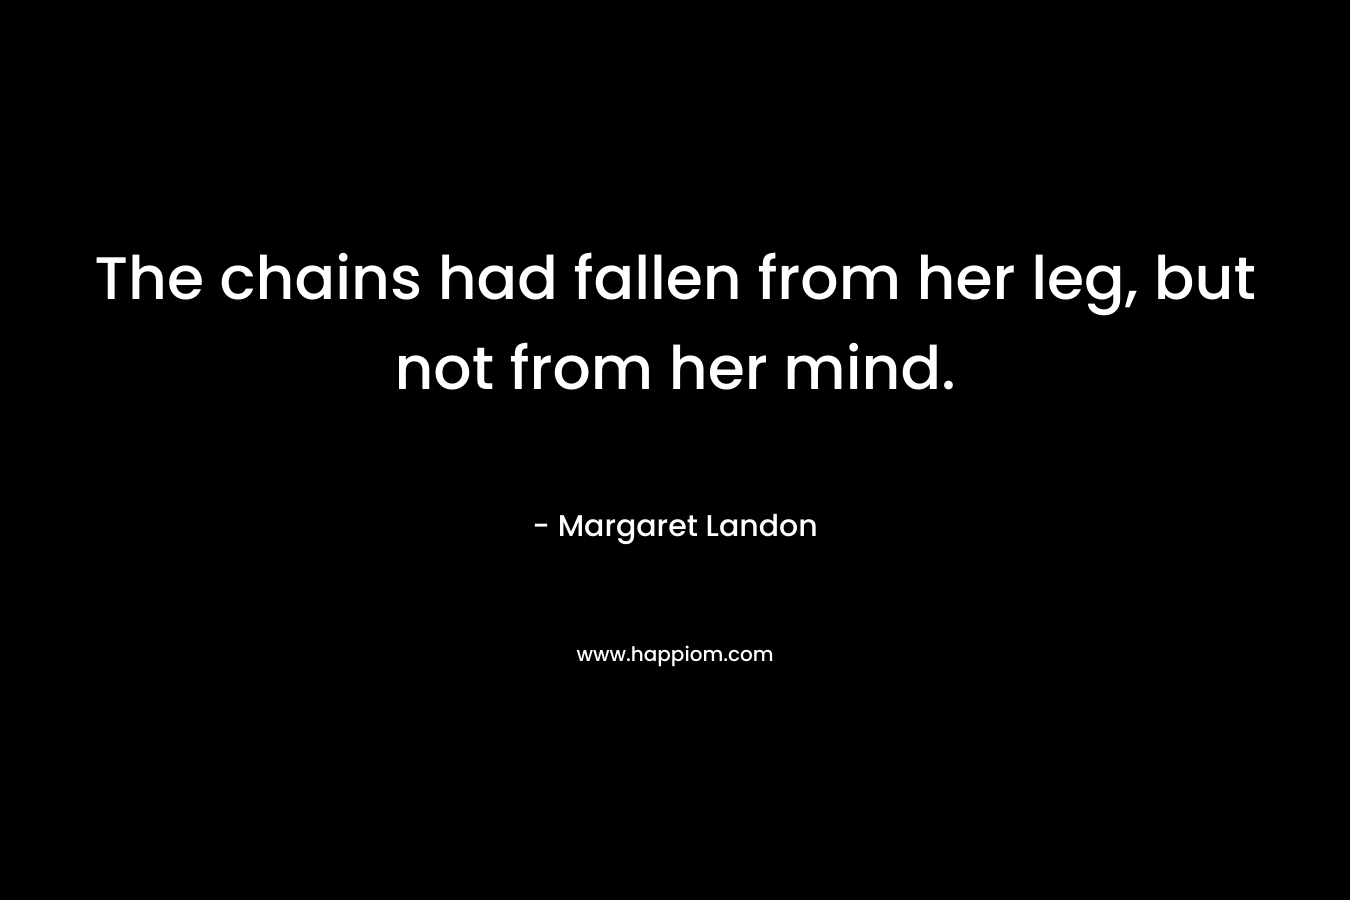 The chains had fallen from her leg, but not from her mind.